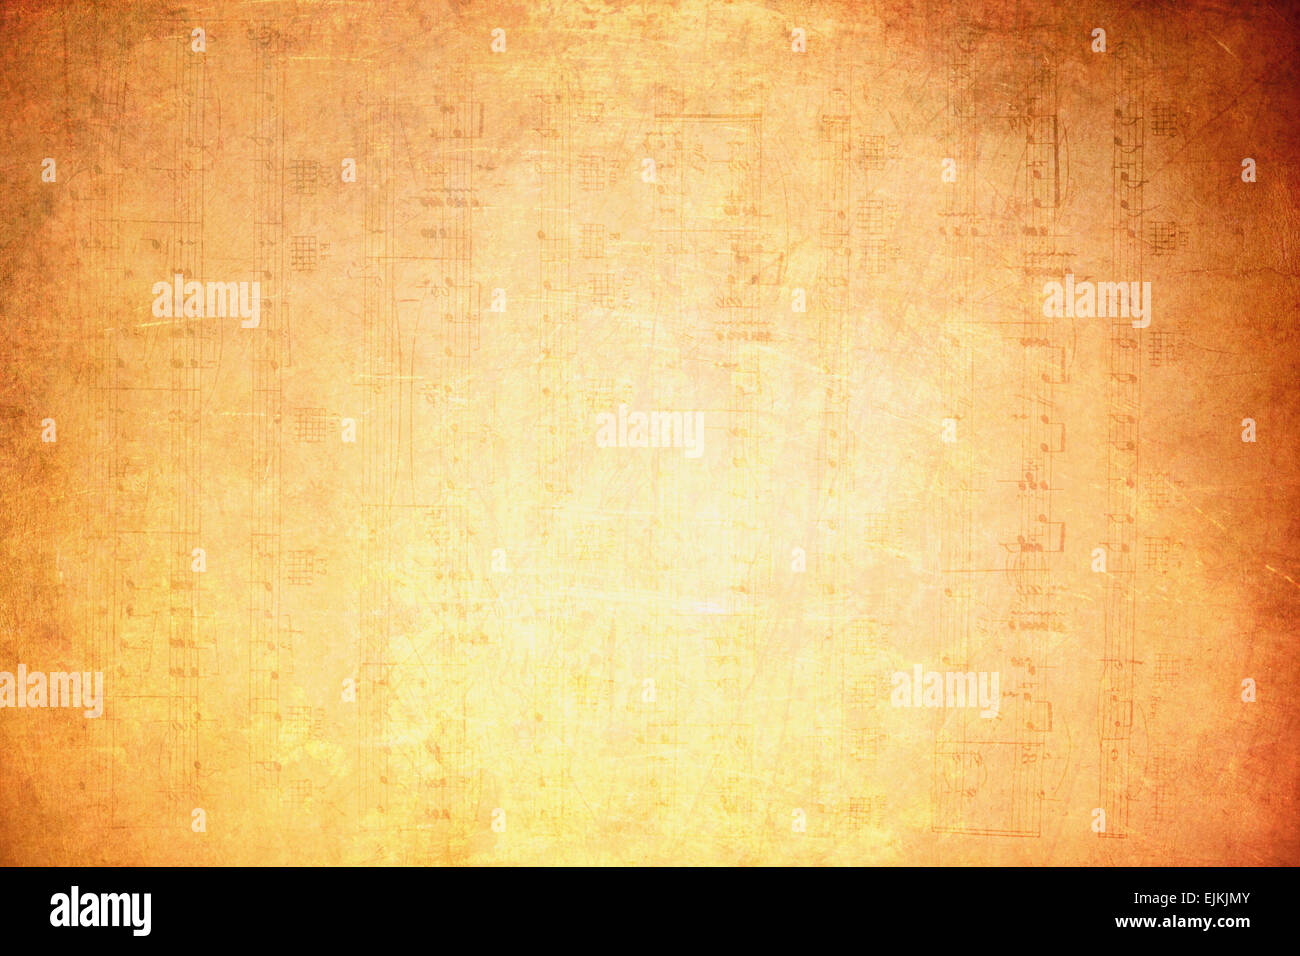 Grunge paper texture background with space for text or image Stock Photo